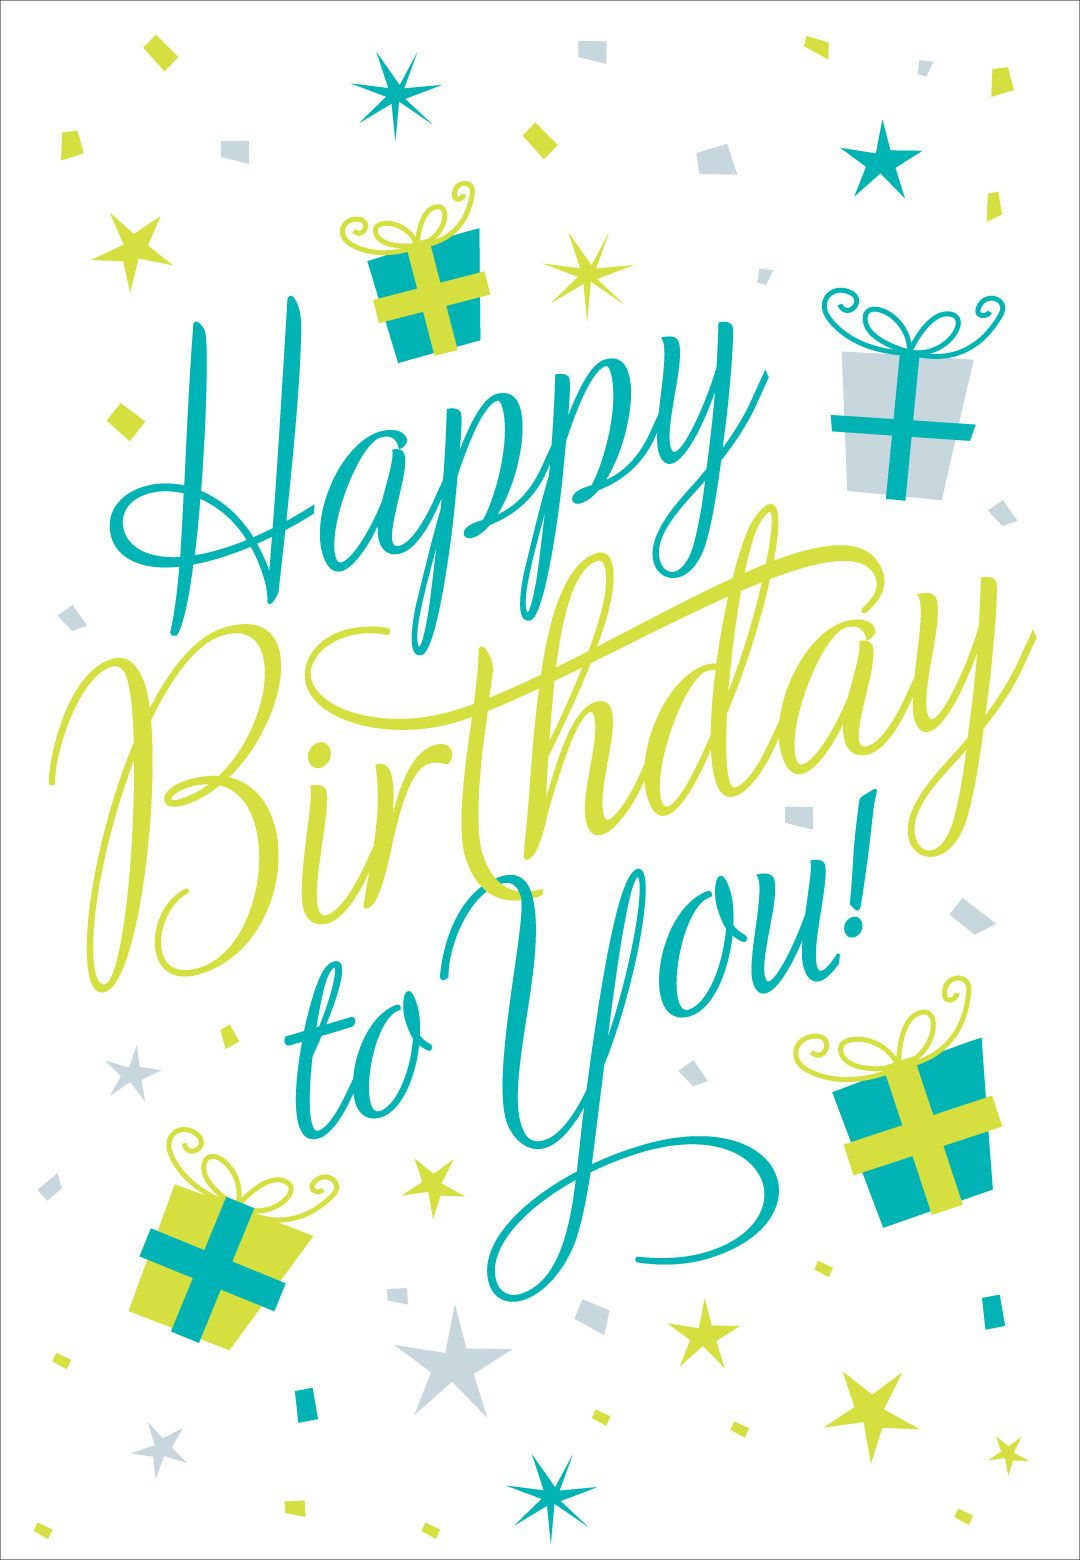 Free Printable Happy Birthday To You Greeting Card #birthday - Free Printable Christian Birthday Greeting Cards